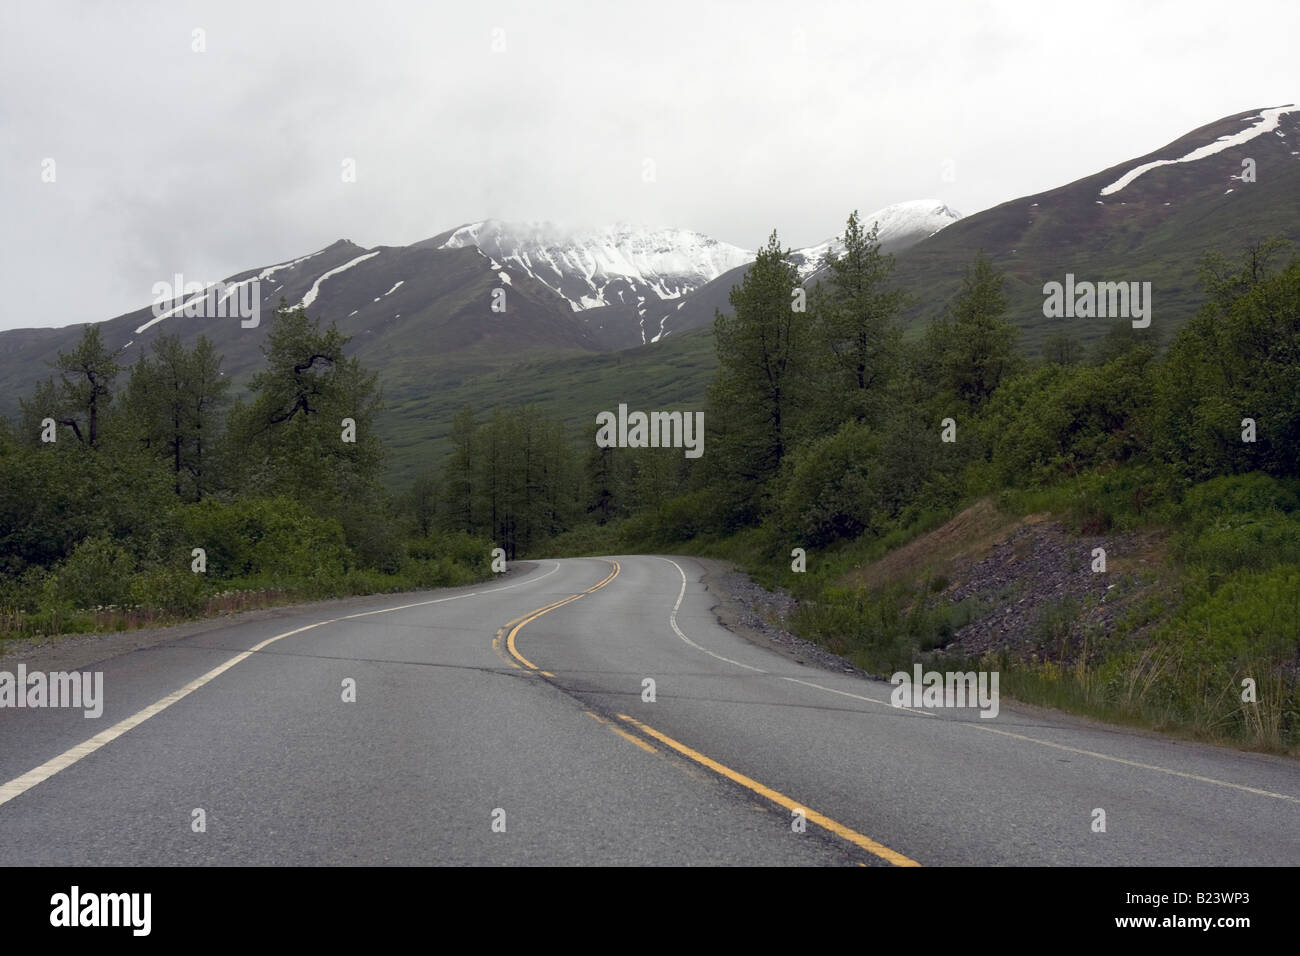 Winding road to nowhere in Alaska, USA Stock Photo